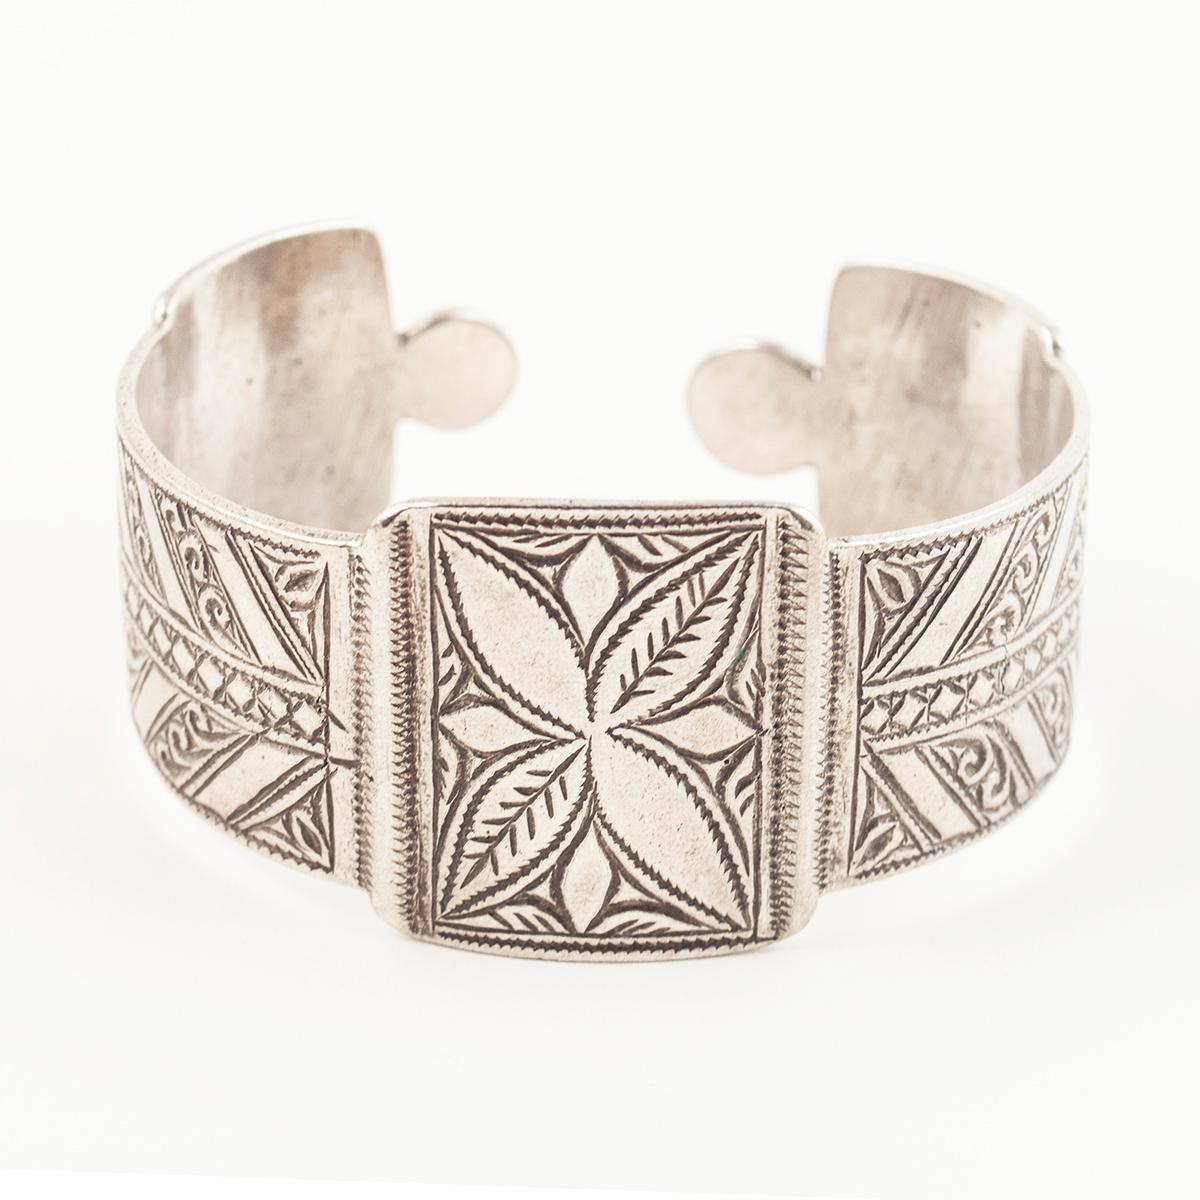 Mid-20th Century Silver Tribal Anklet, Berber People, Tunisia

This is a large silver cuff or anklet with unusual geometric markings and would fit a man's or a large woman's wrist. There are no hallmarks, but it was purchased in Tunisia. 
9